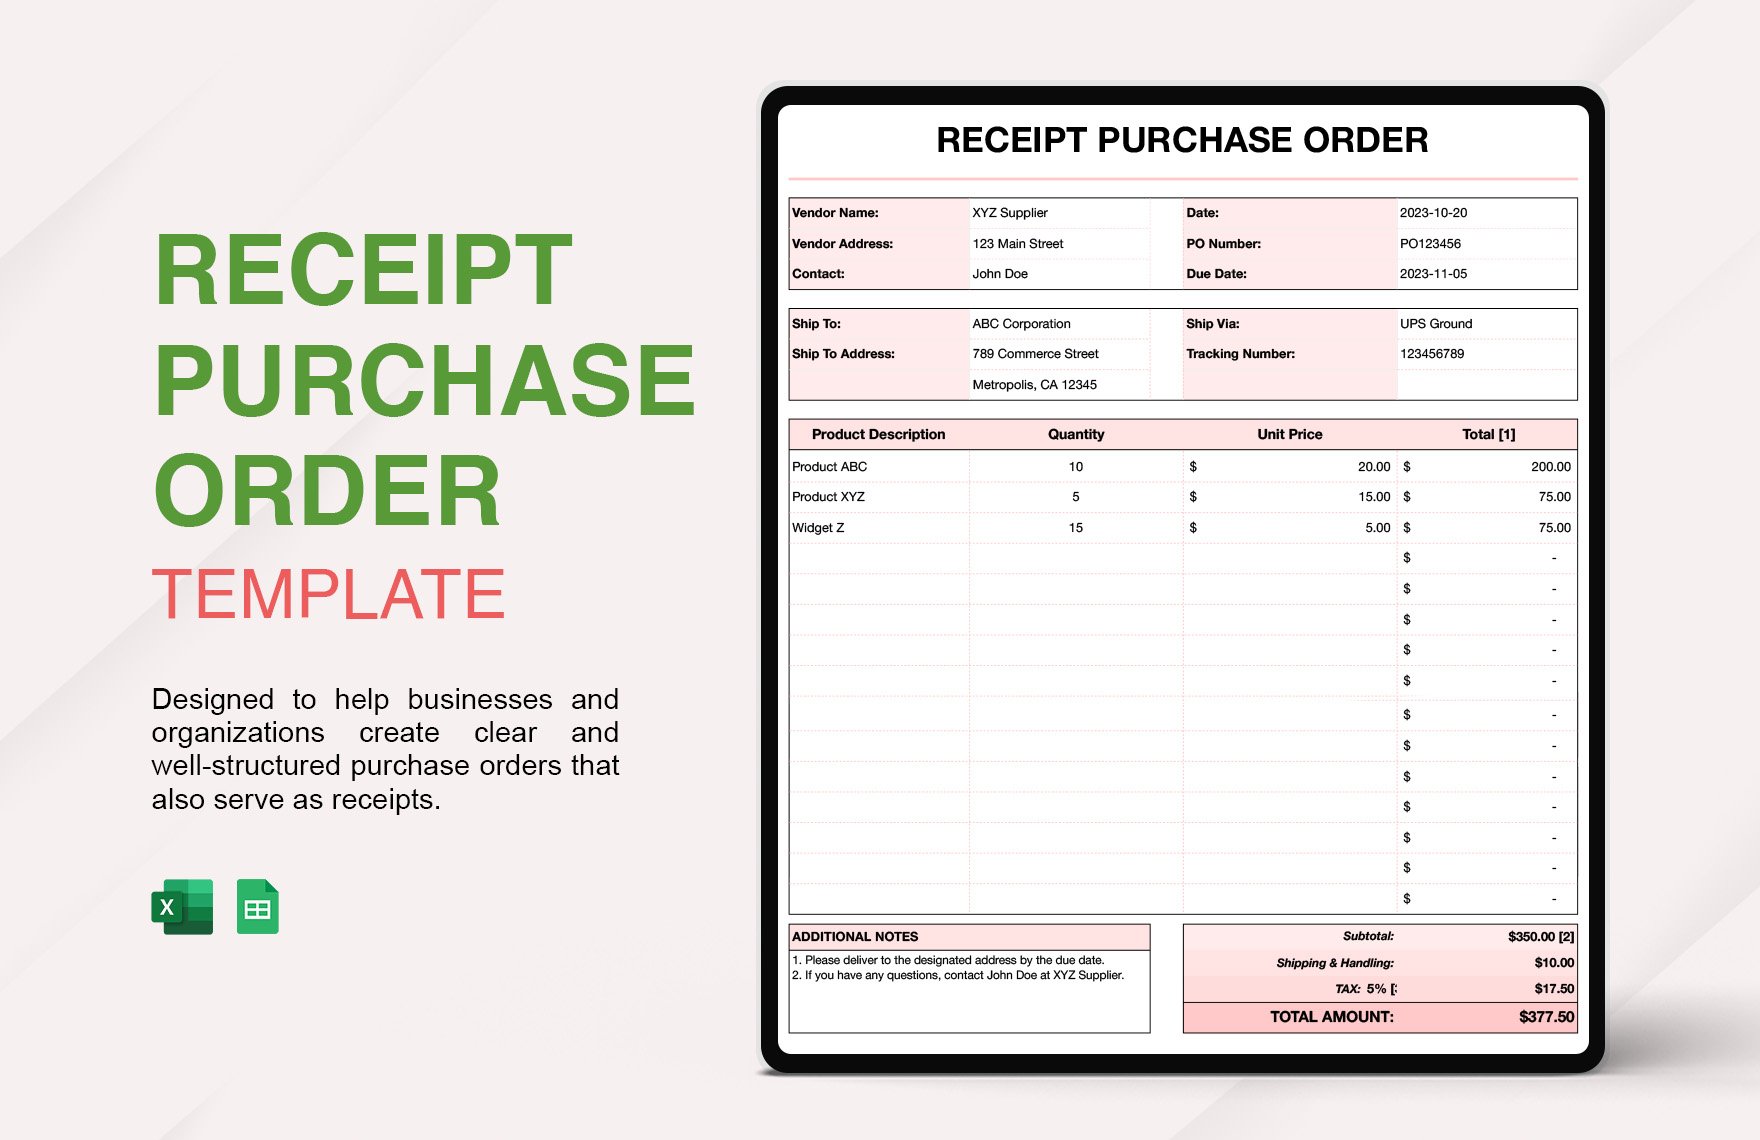 Free Receipt Purchase Order Template